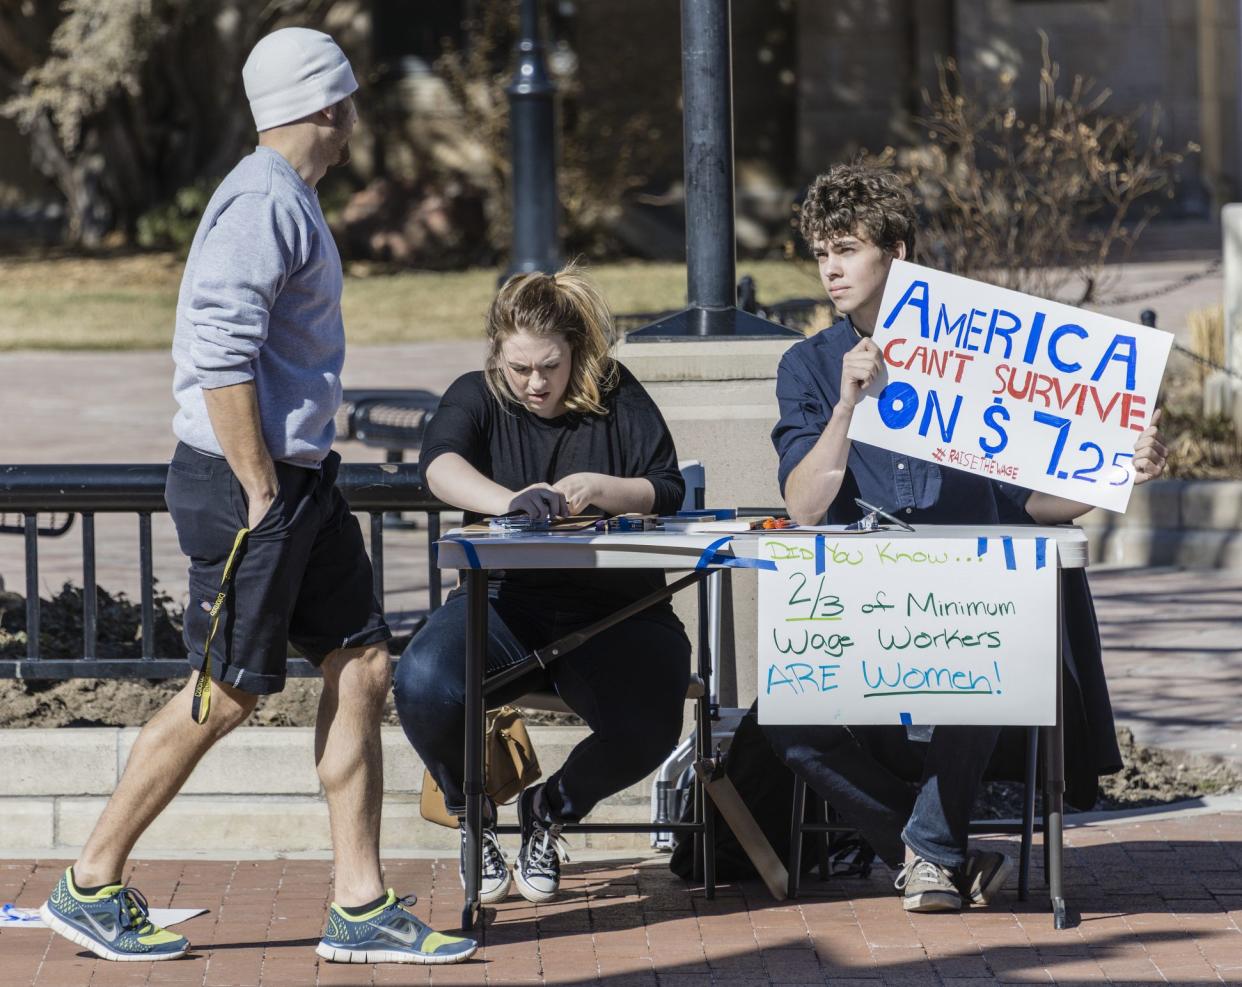 Boulder, Colorado, USA - February 19, 2014: Two young people in downtown Boulder explain why Americans can't survive on $7.25 minimum wager per hour.